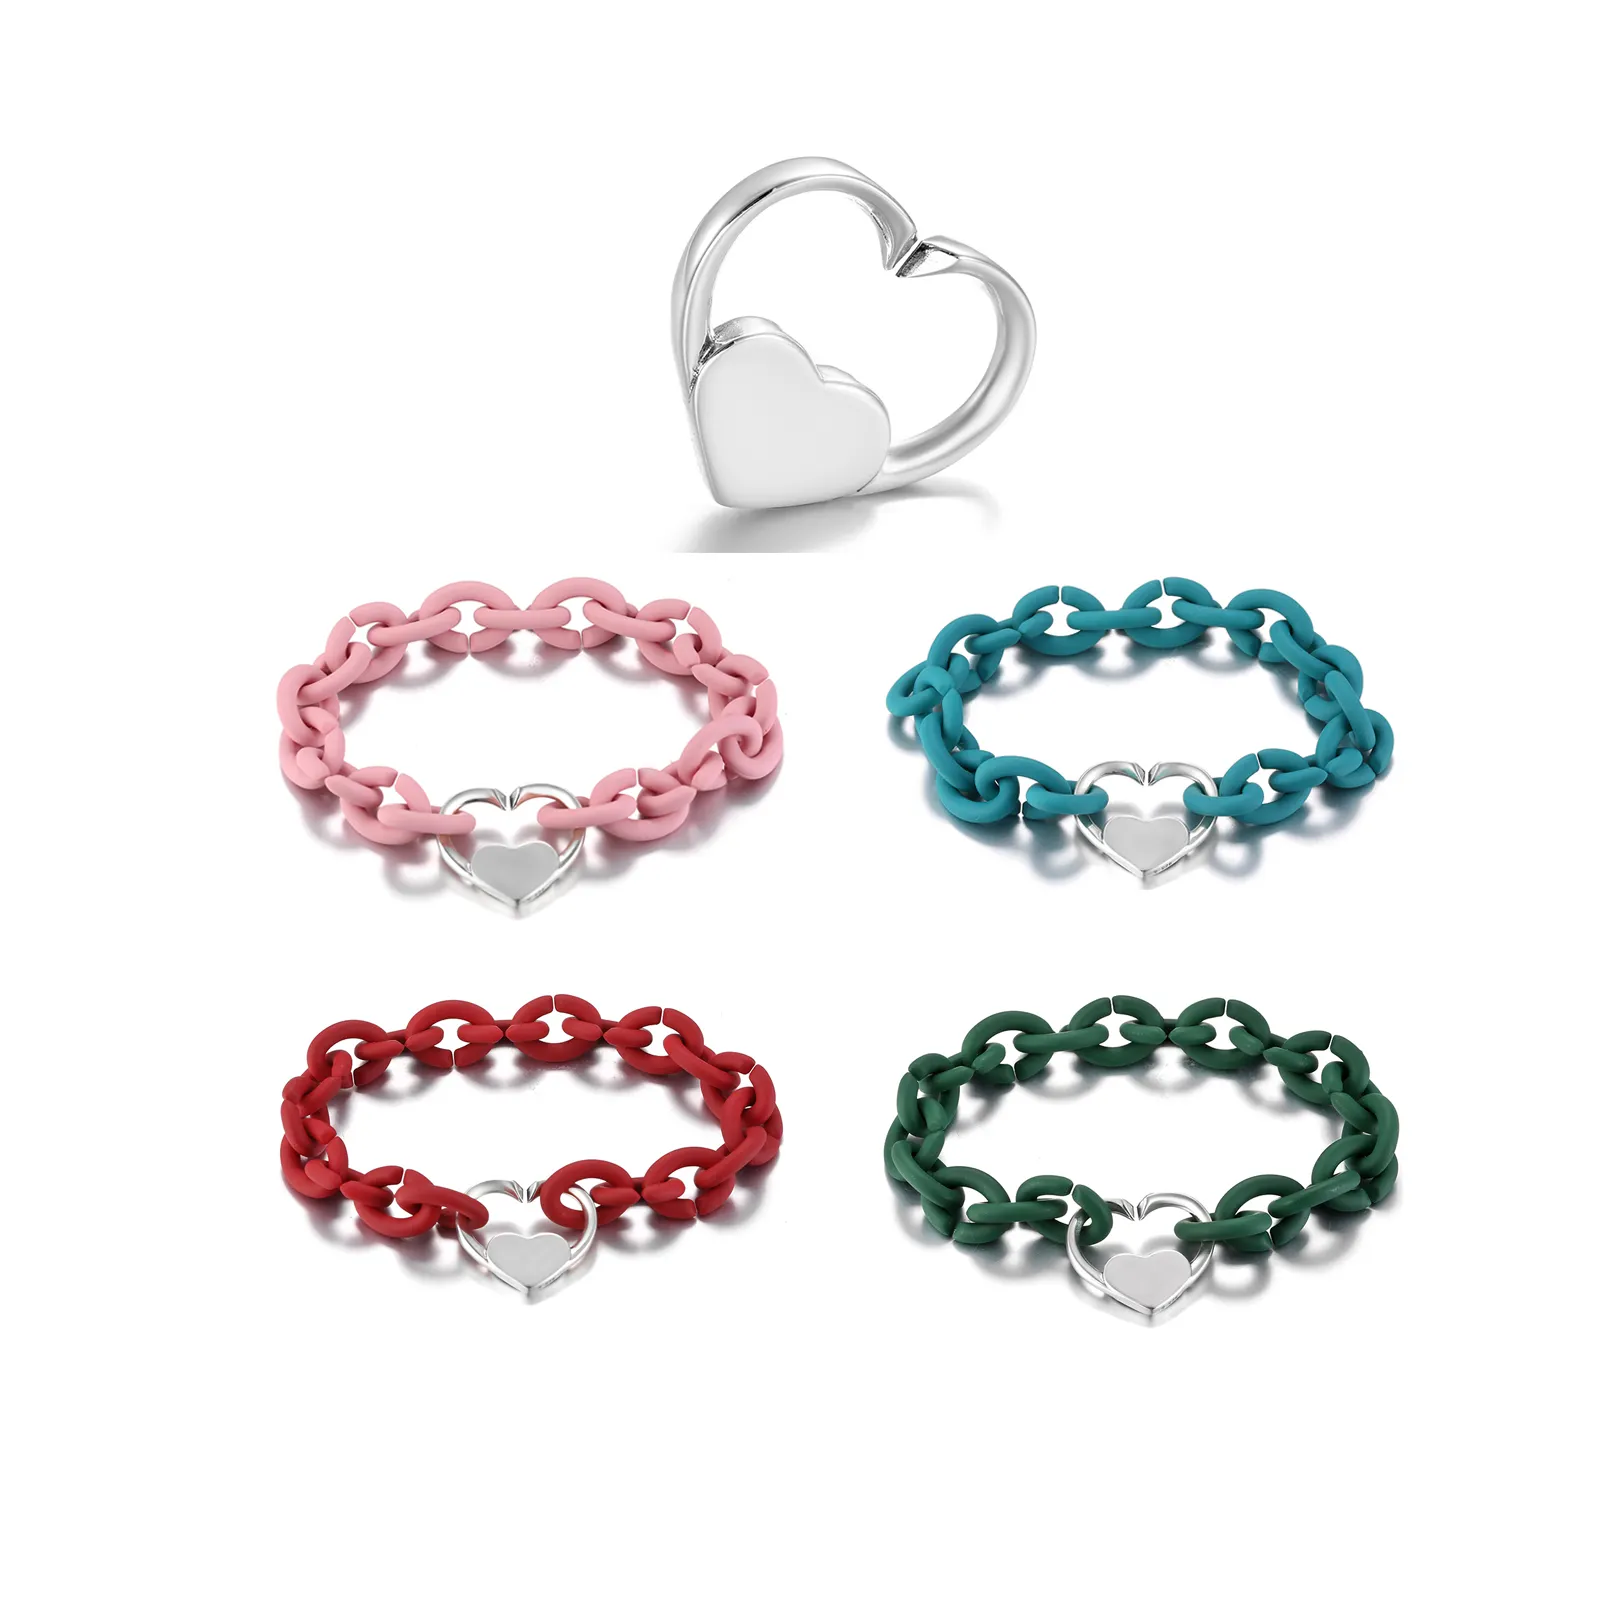 Real 925 sterling silver Heart Beads 10 Colors Bracelet Charms Men Hard Rubber Strand Charms for Woman Men Accessories HOT SALE